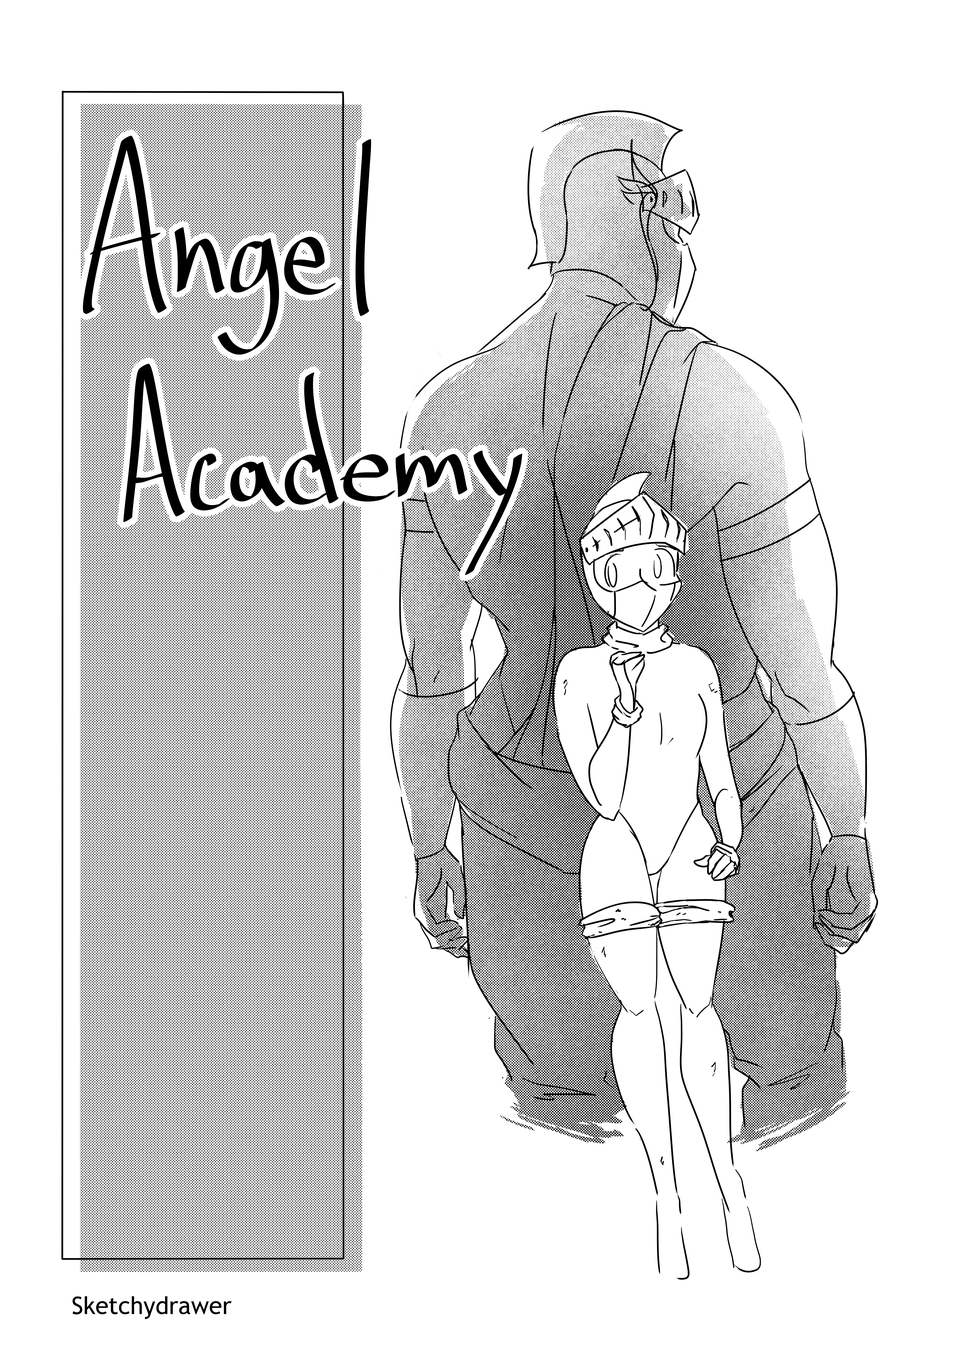 Angel Academy cover update